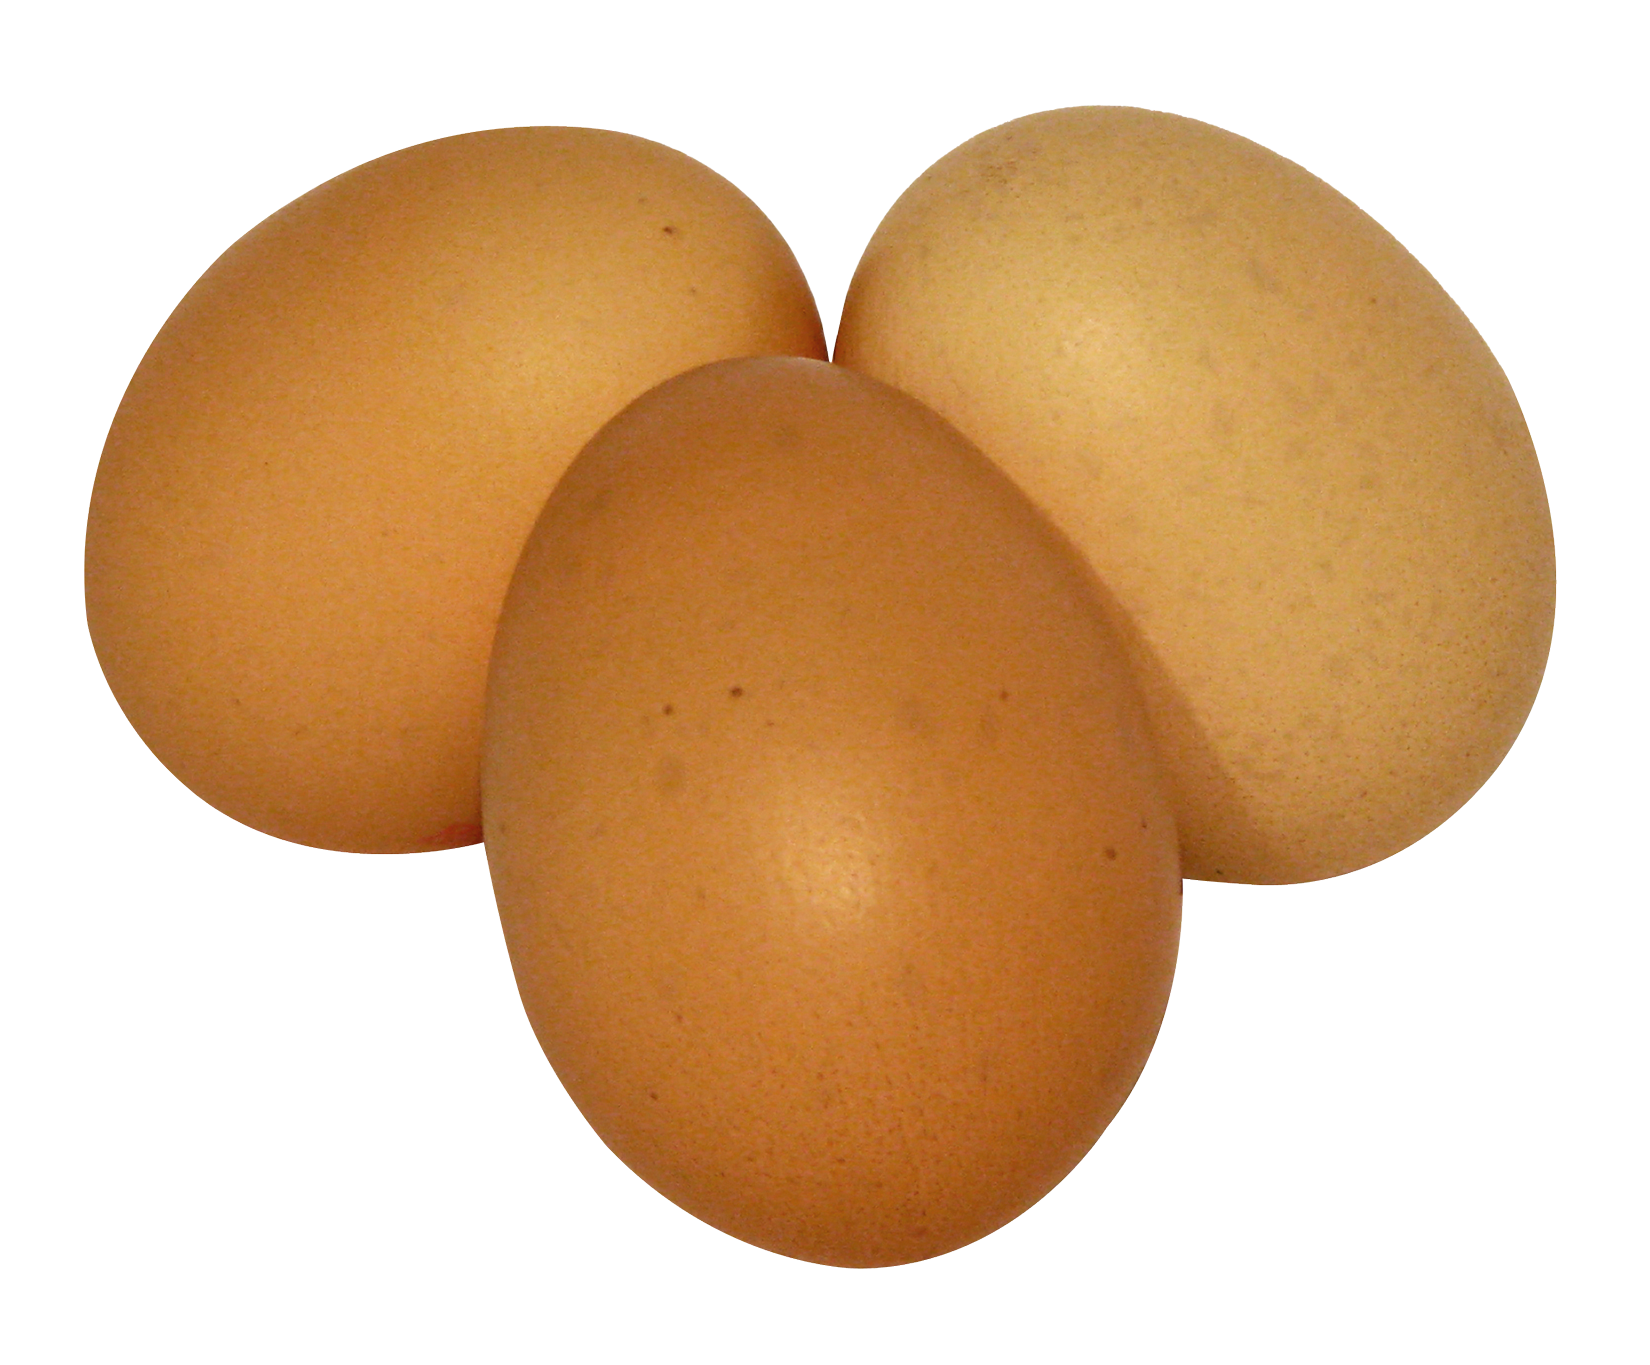 Egg PNGs for Free Download